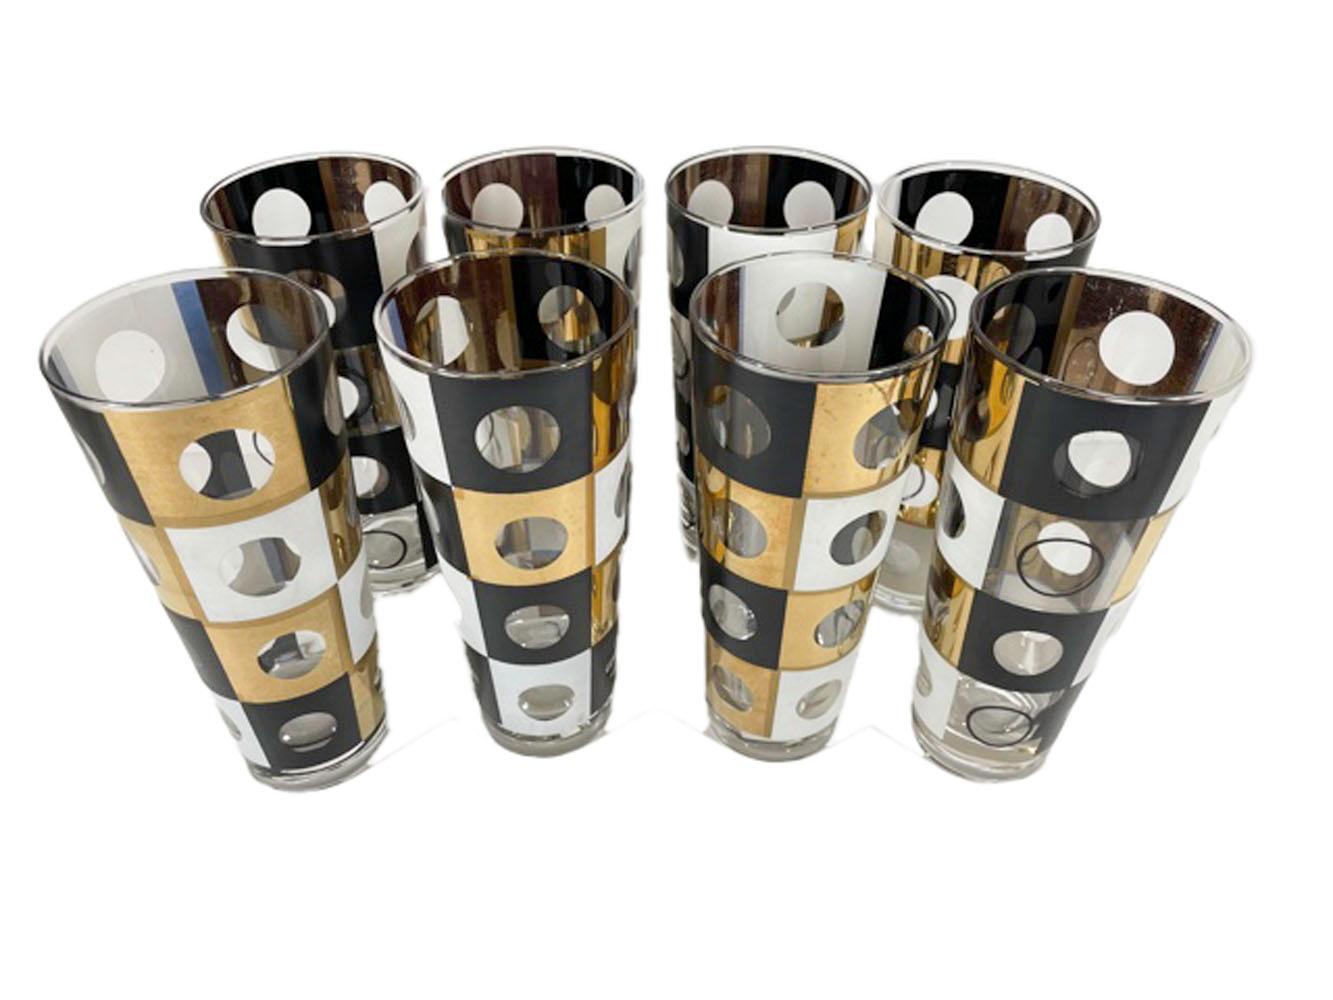 Set of 8 Mid-Century Modern Tom Collins glasses in a black and white enamel with 22k gold design of squares with clear circles in the center of each.